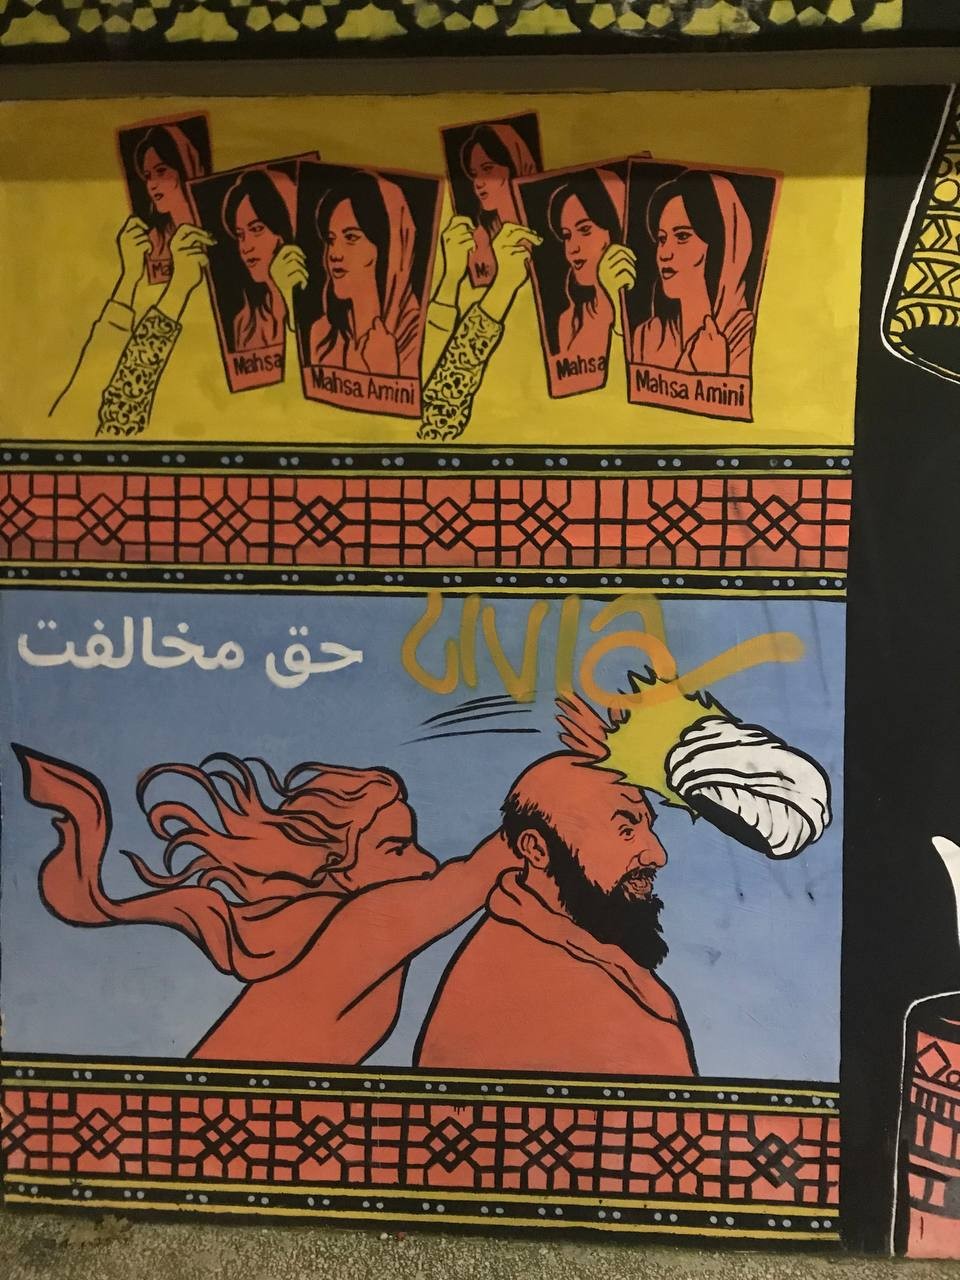 Street Art depicting people holding Mahsa Amini's picture above. Below, It depicts a woman with no hijab turban-tossing. "The Right to Object" is written in Persian.